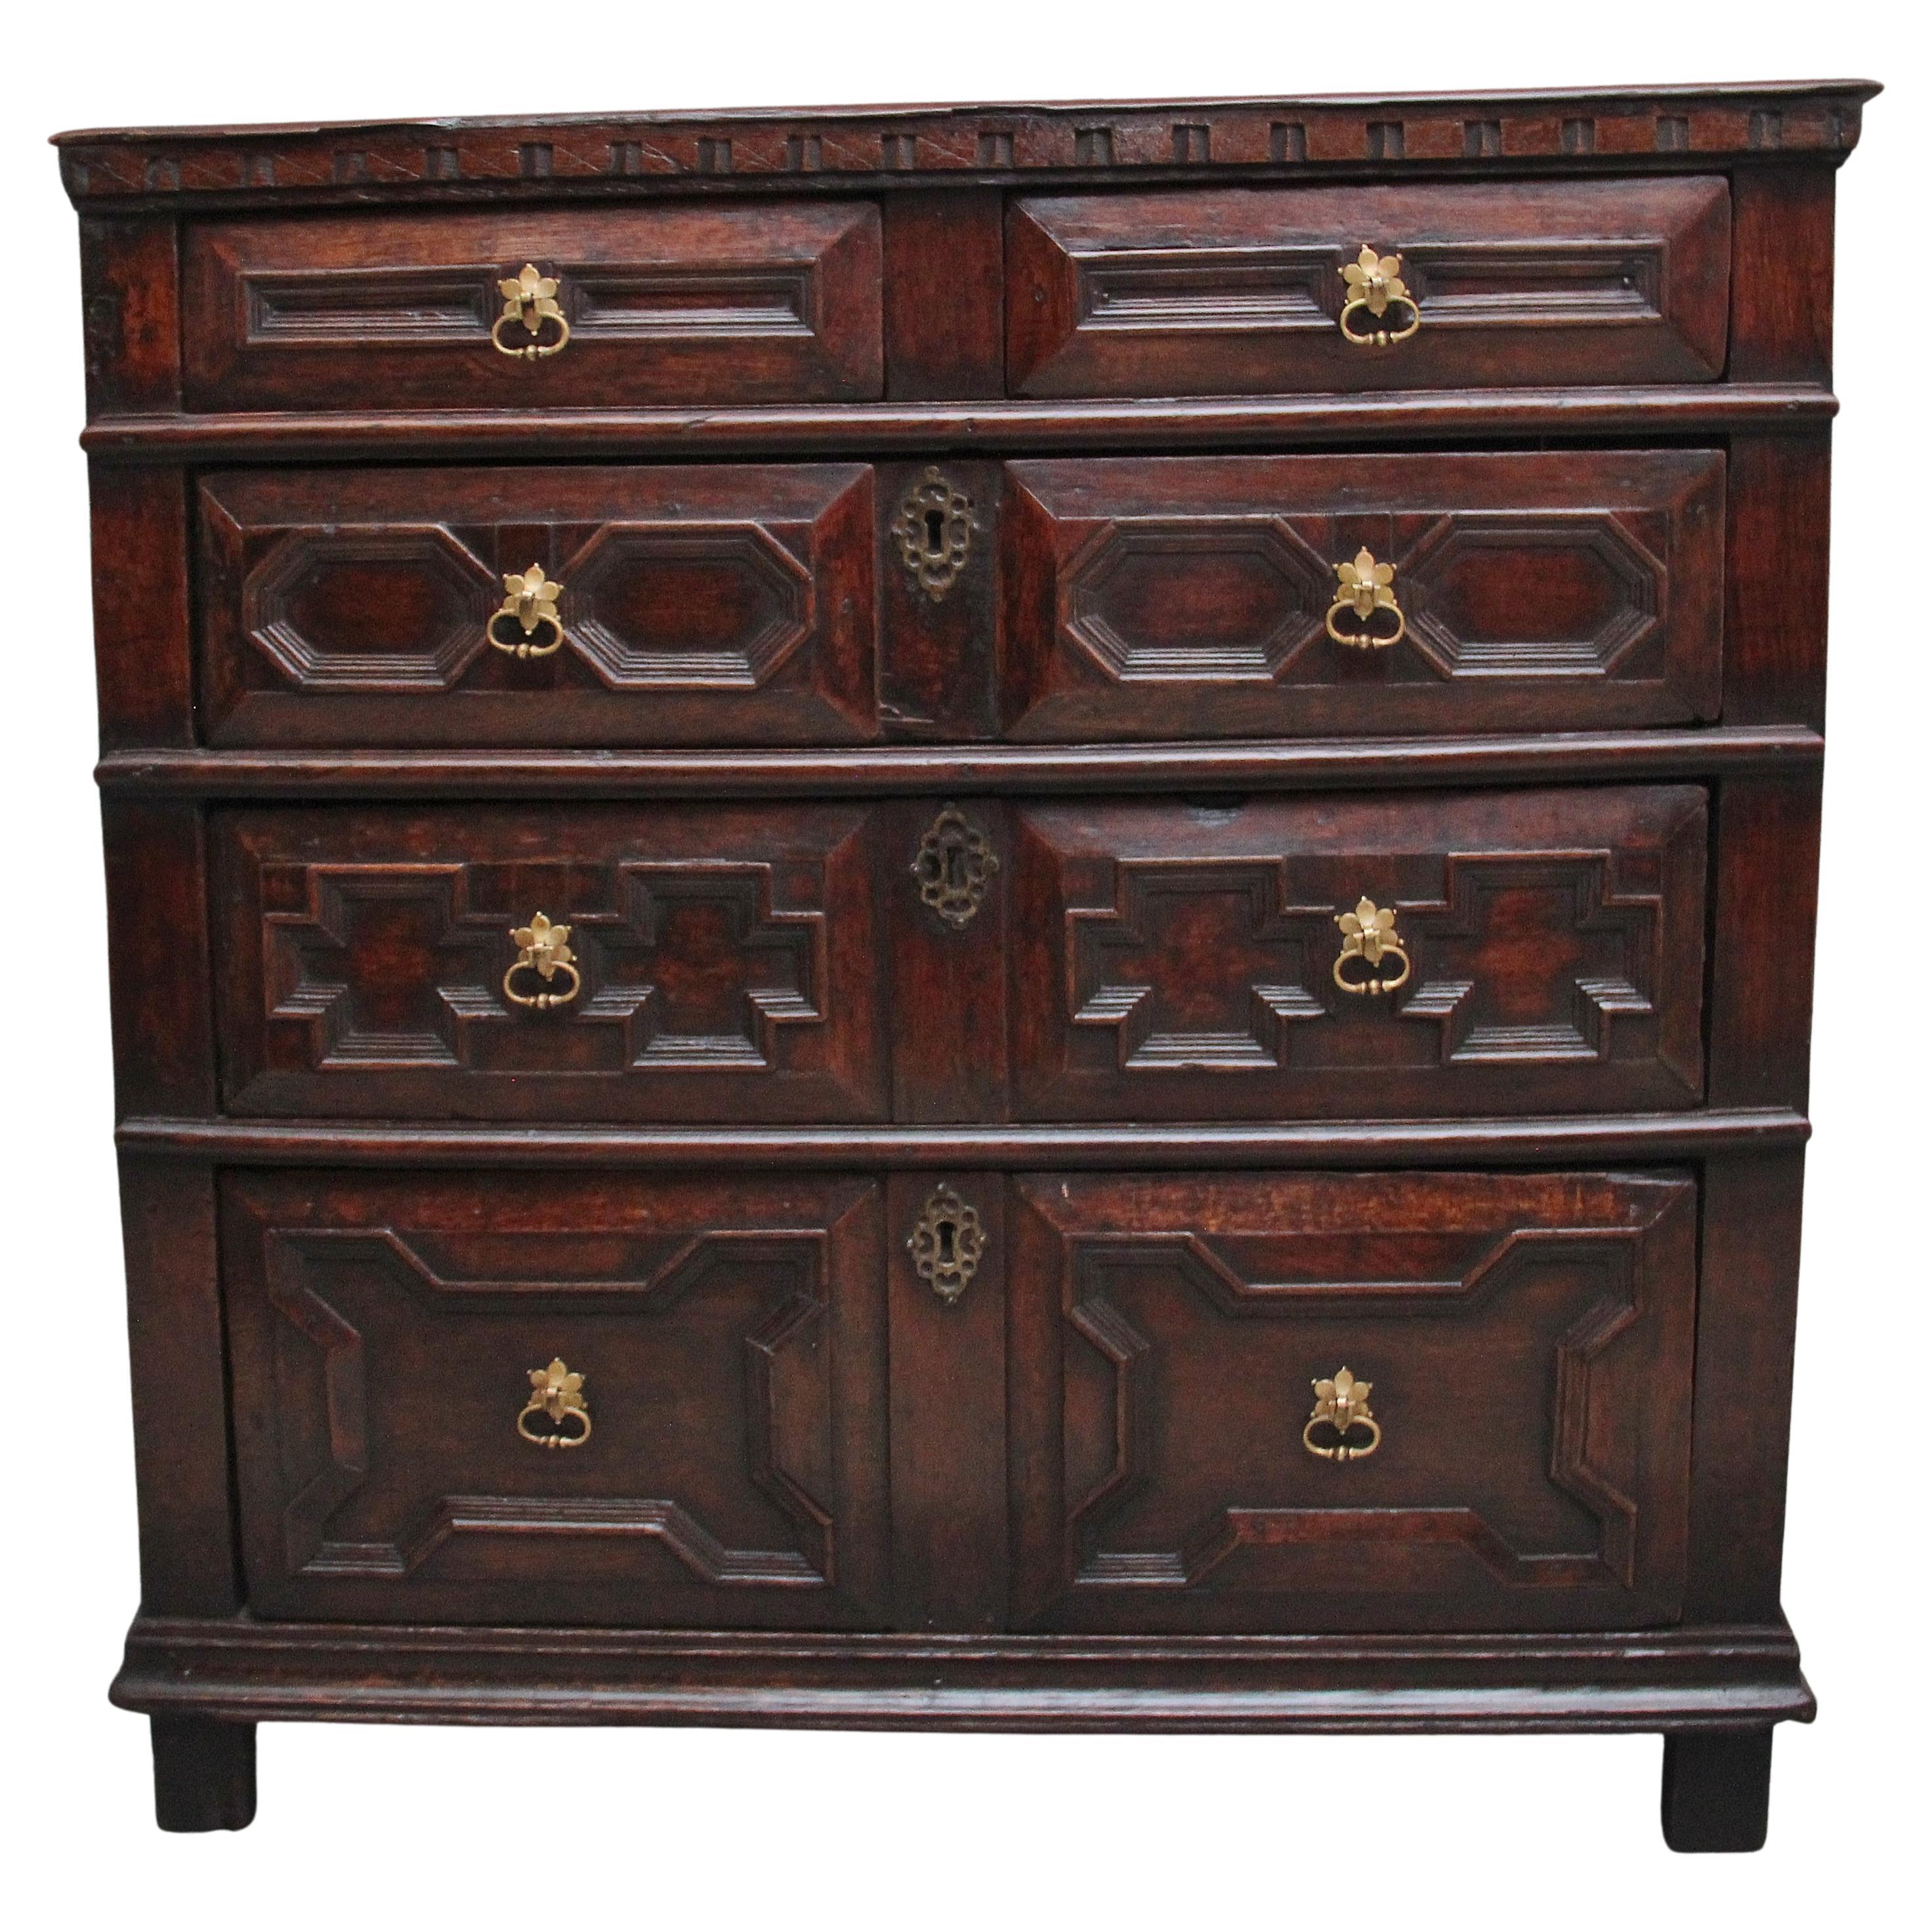 Early 18th Century Oak Moulded Front Chest of Drawers from the Stuart Period